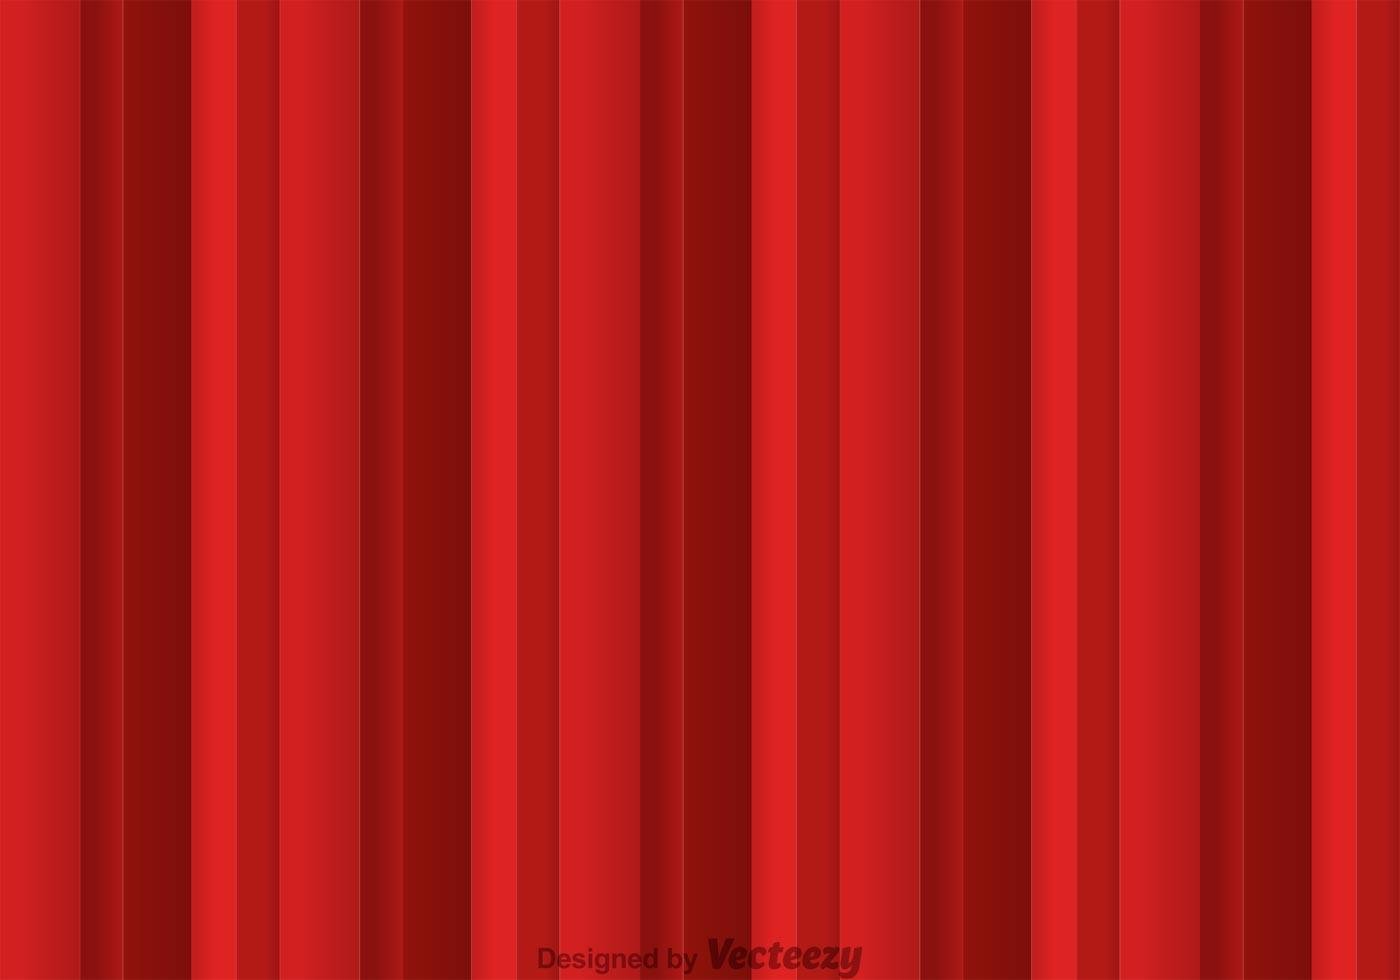 Red Maroon Line Background Free Vector Art, Stock